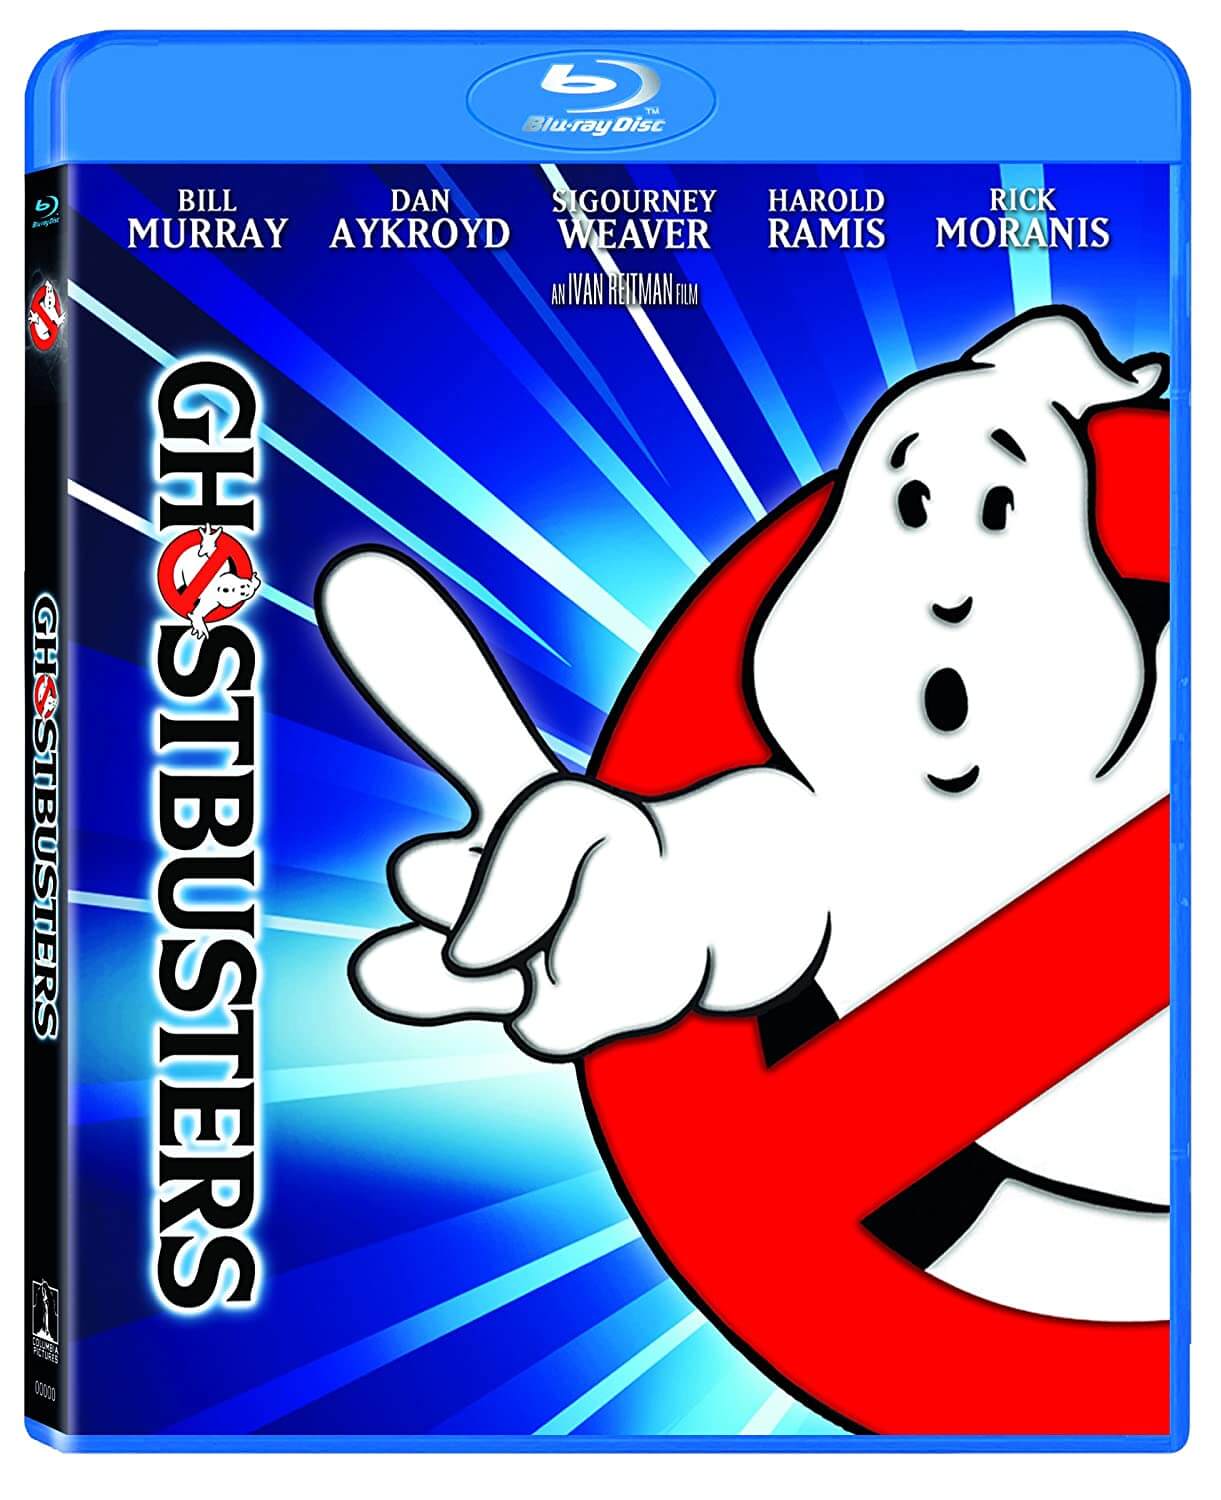 "Ghostbusters" (1984)